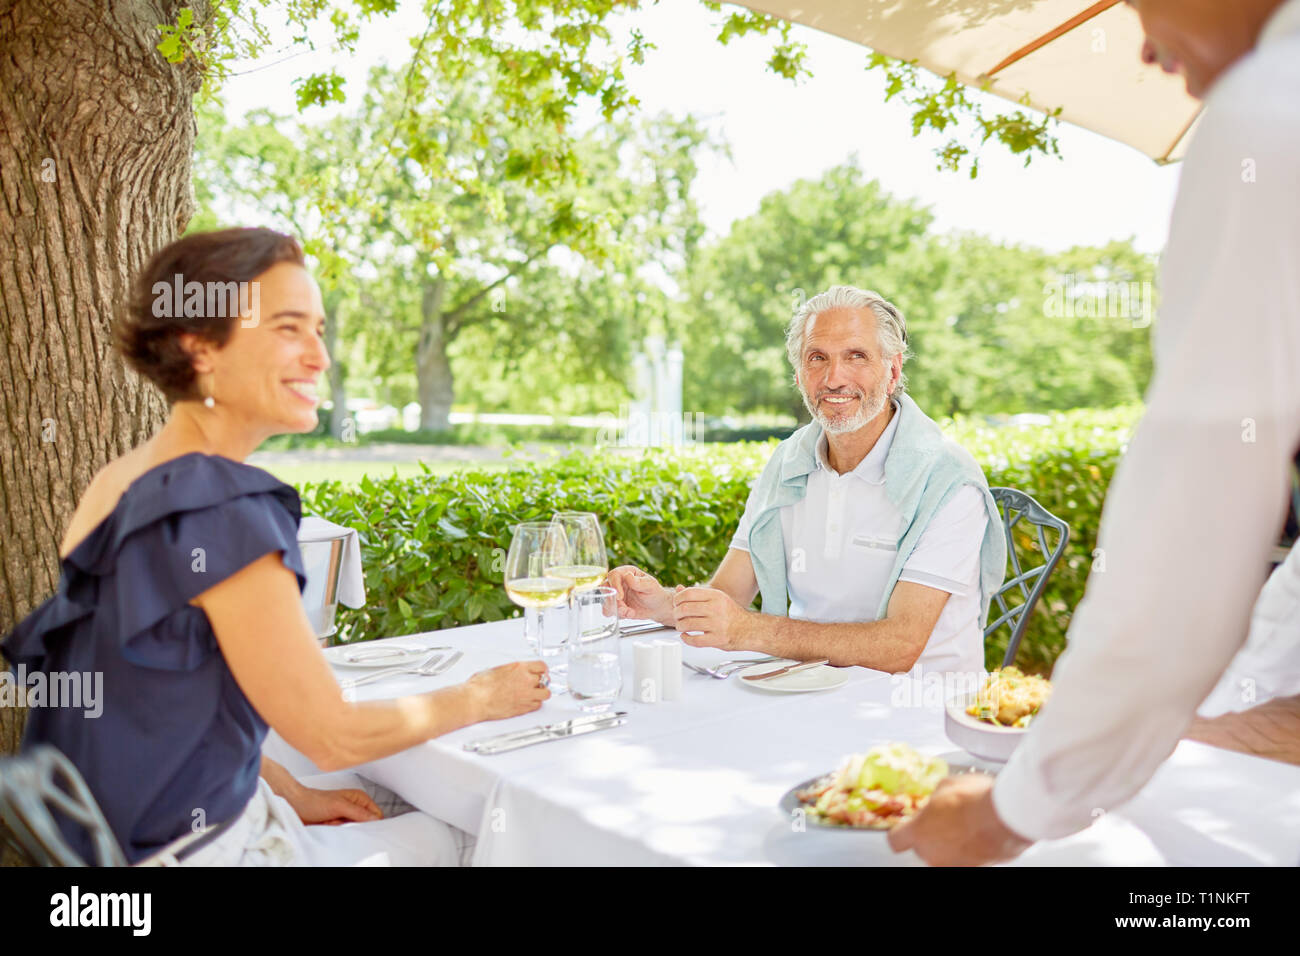 Waiter serving food to mature couple dining at patio table Stock Photo